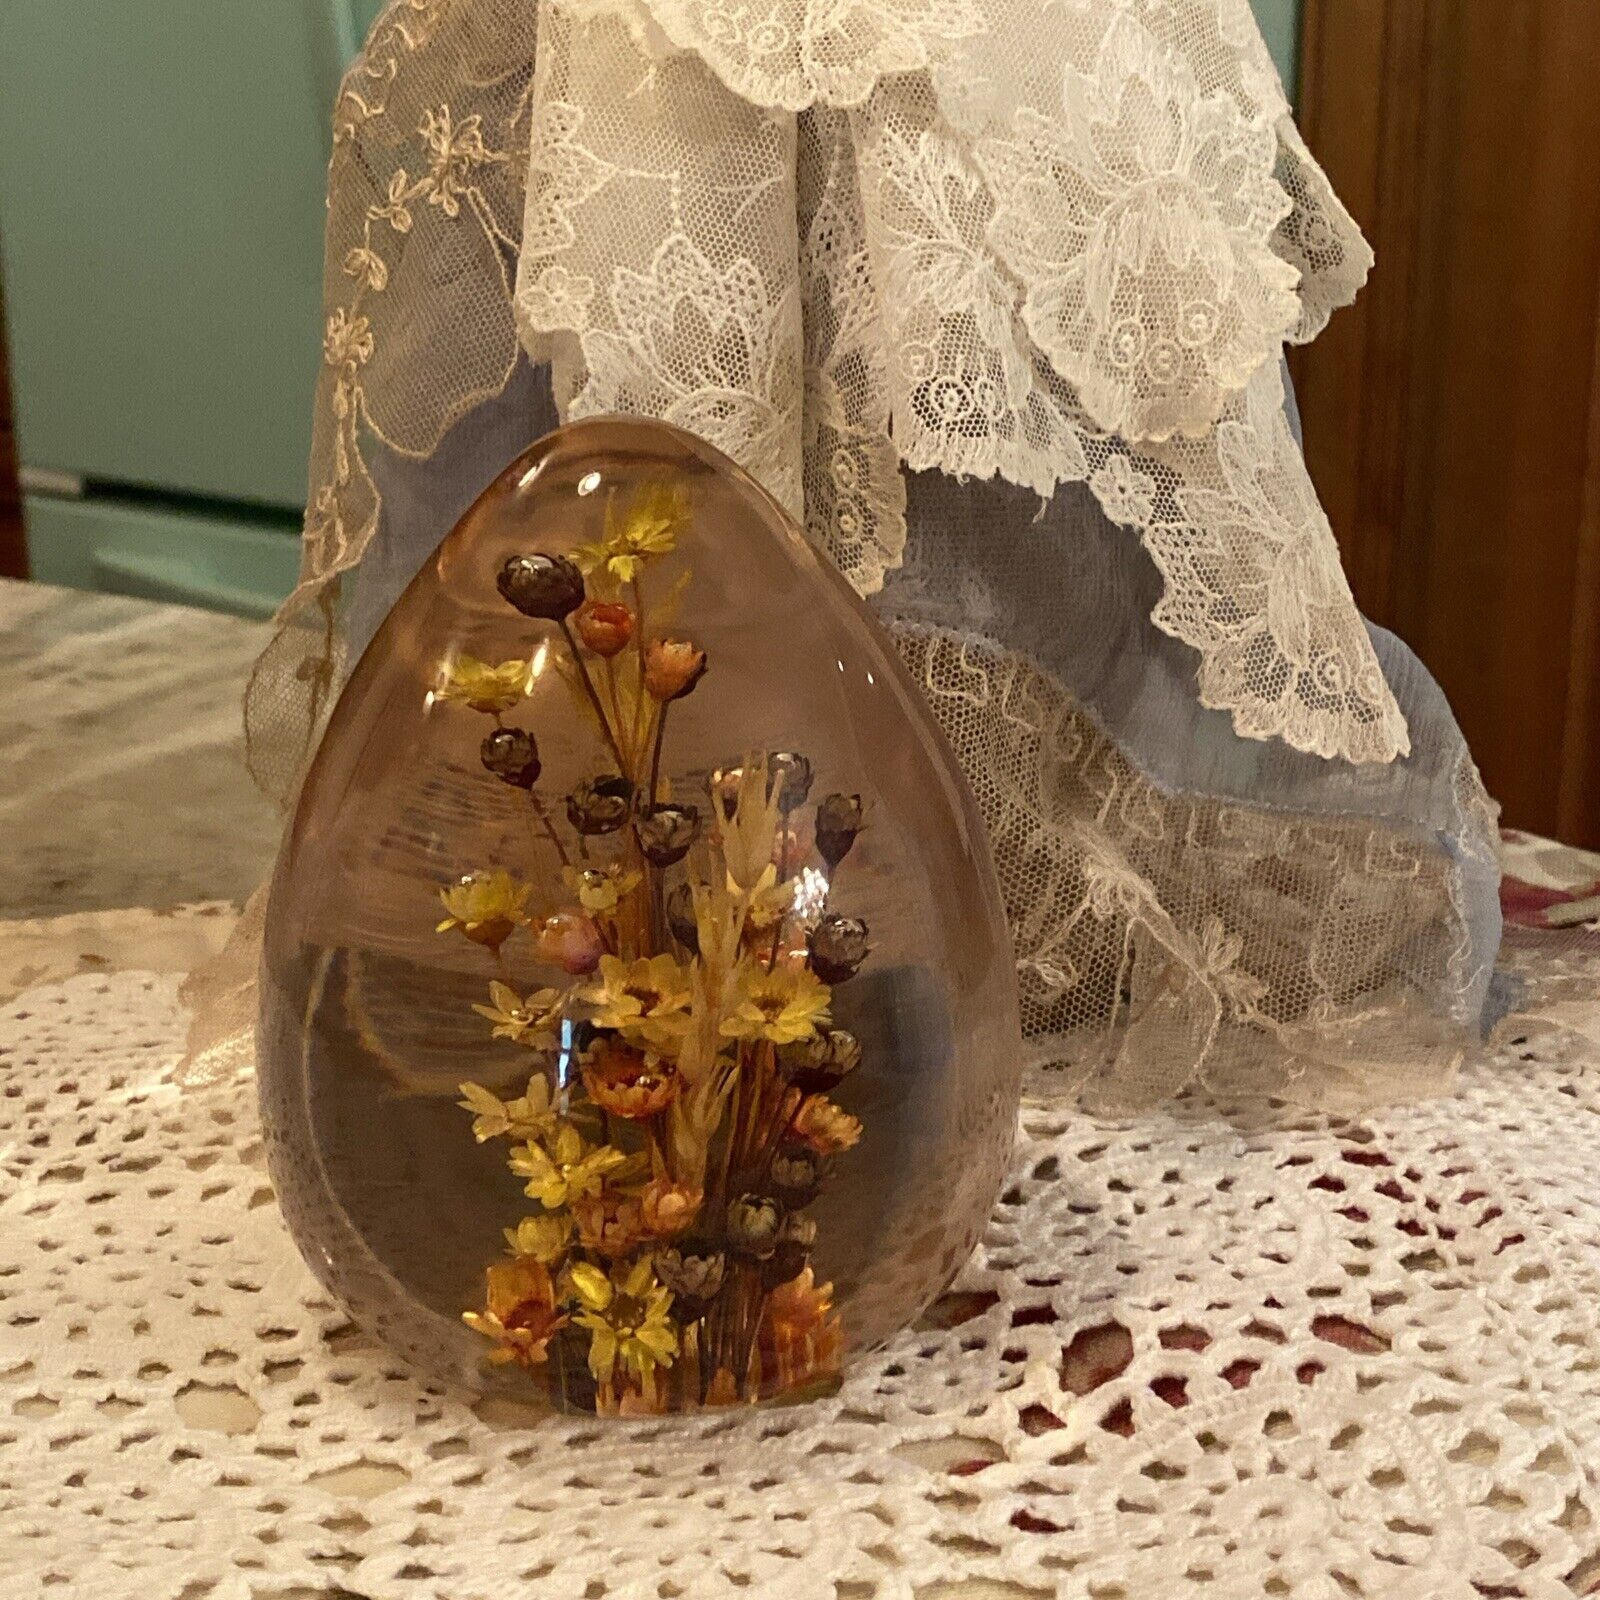 Vintage Lucite Acrylic Egg Shaped Paperweight with Dried Flowers Inside